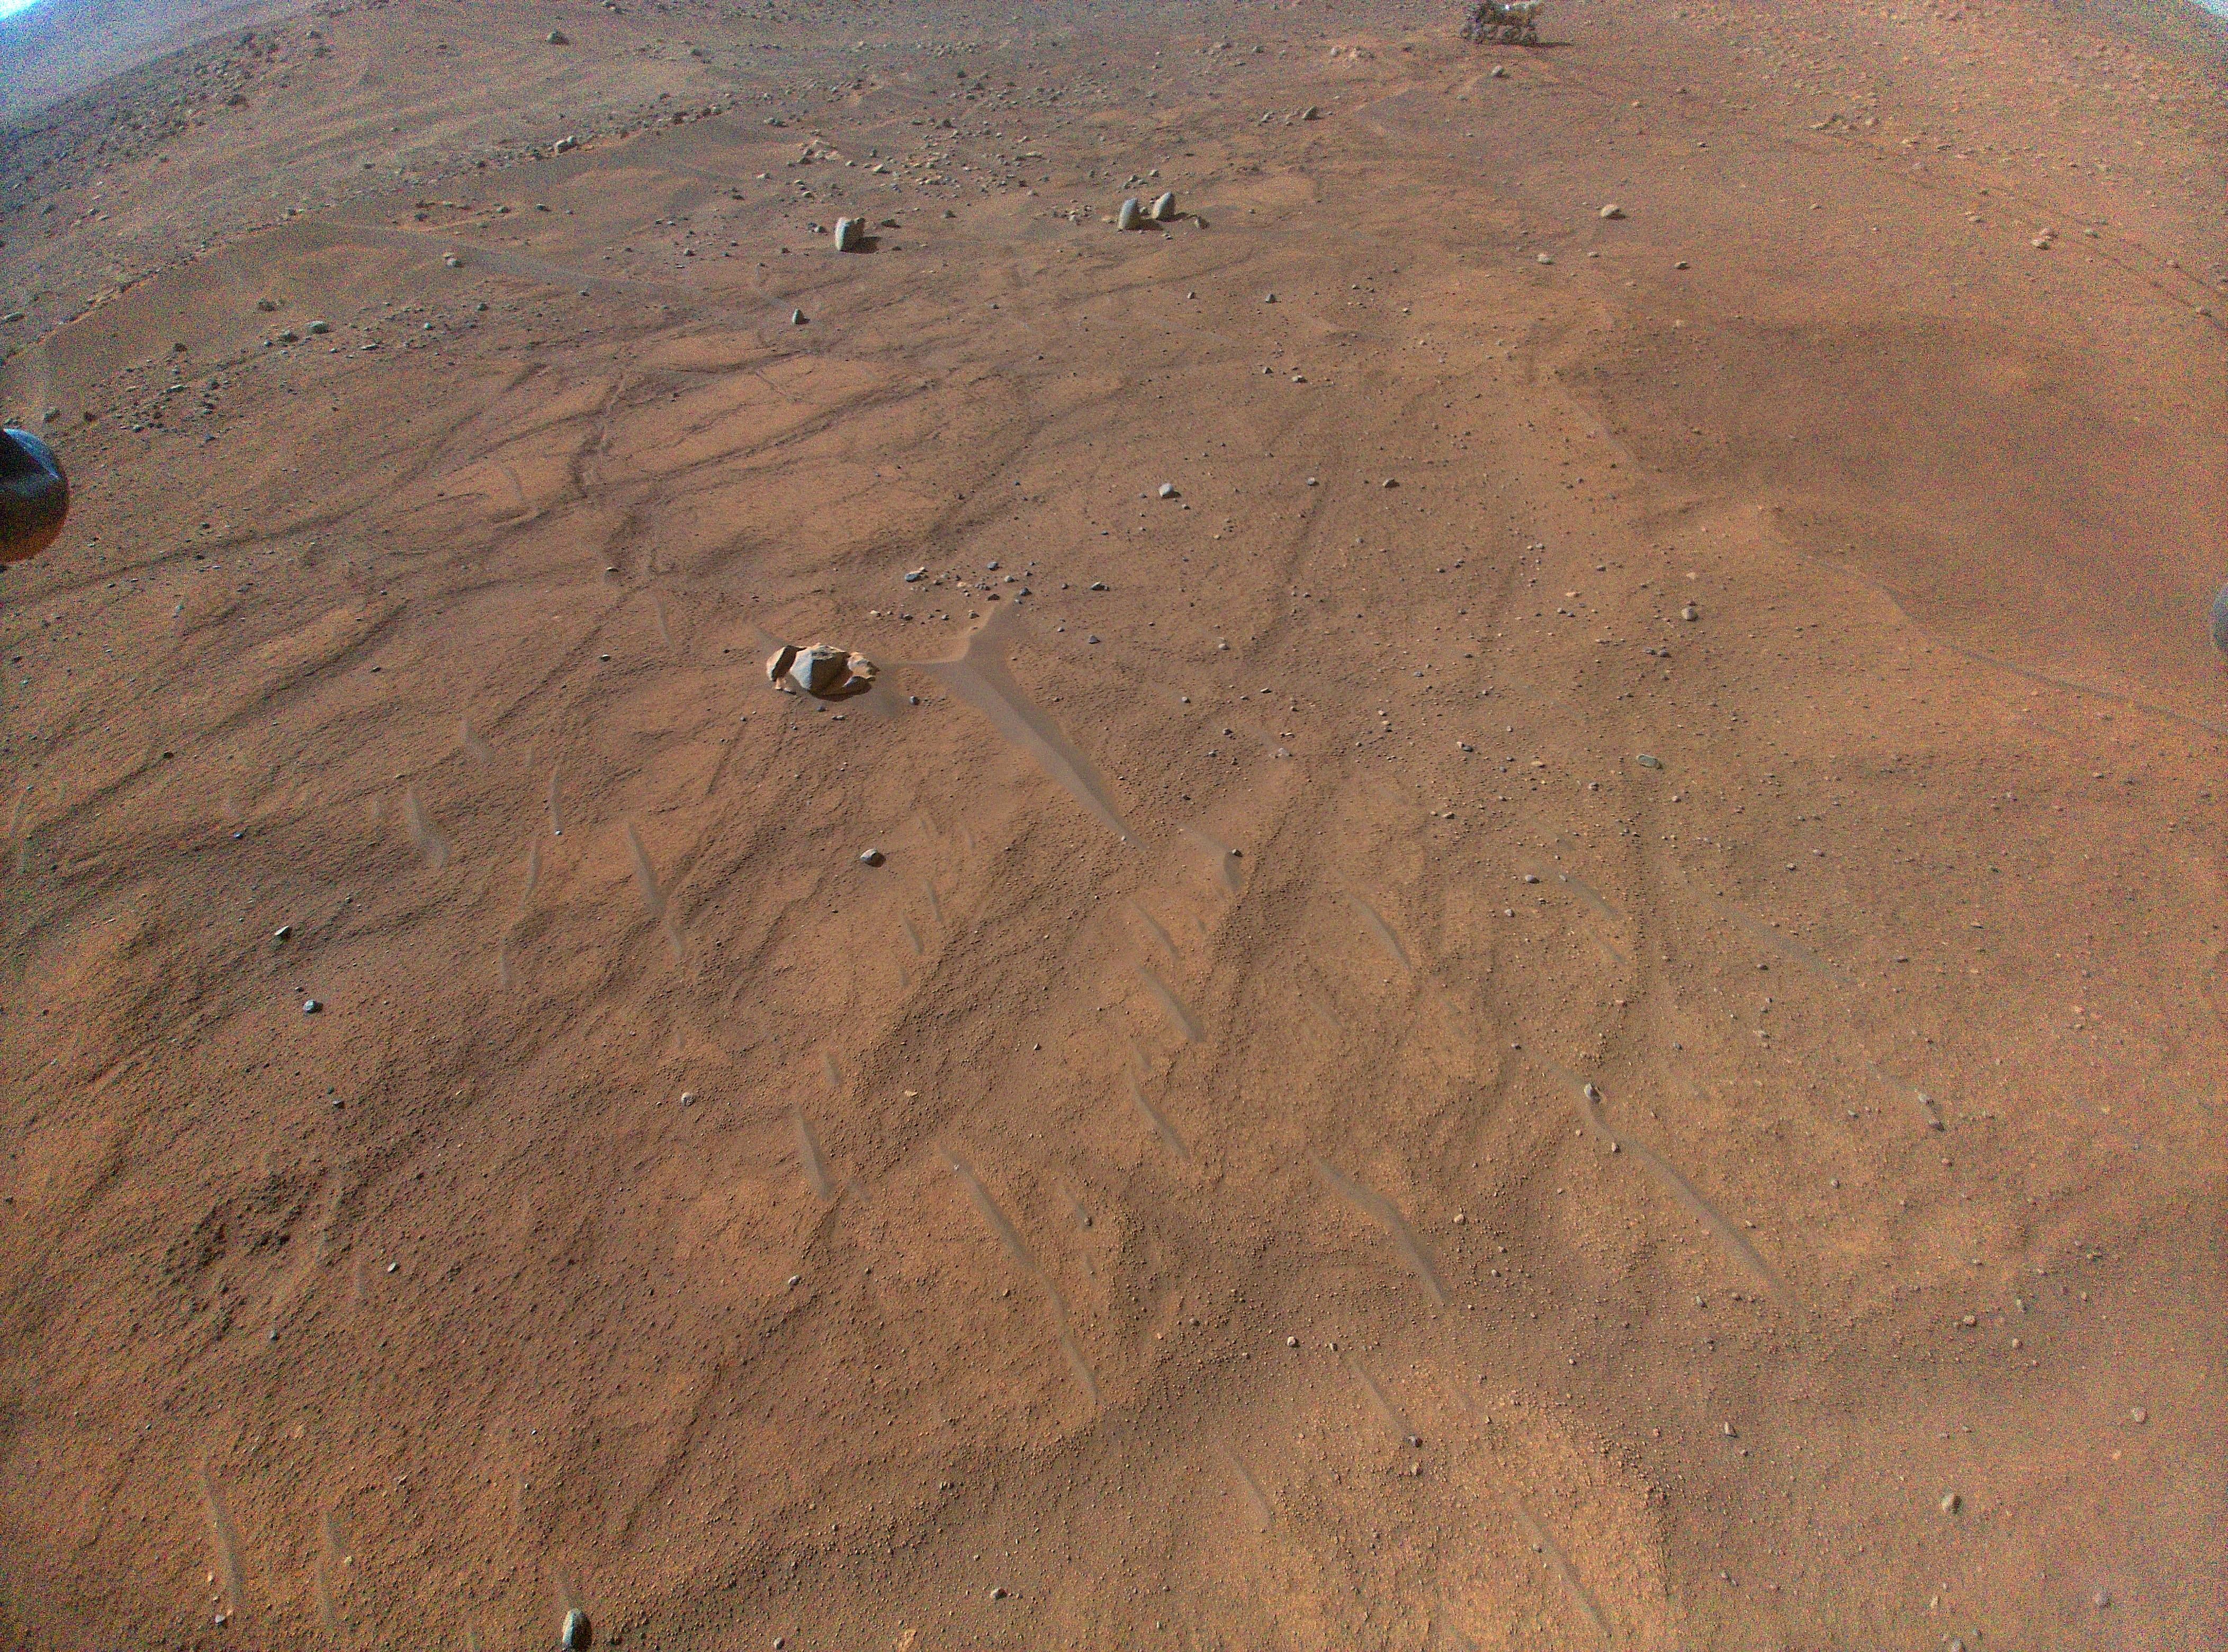 The Perseverance rover can be seen at the top of this image taken by the Ingenuity 54 helicopter during its 54th flight.